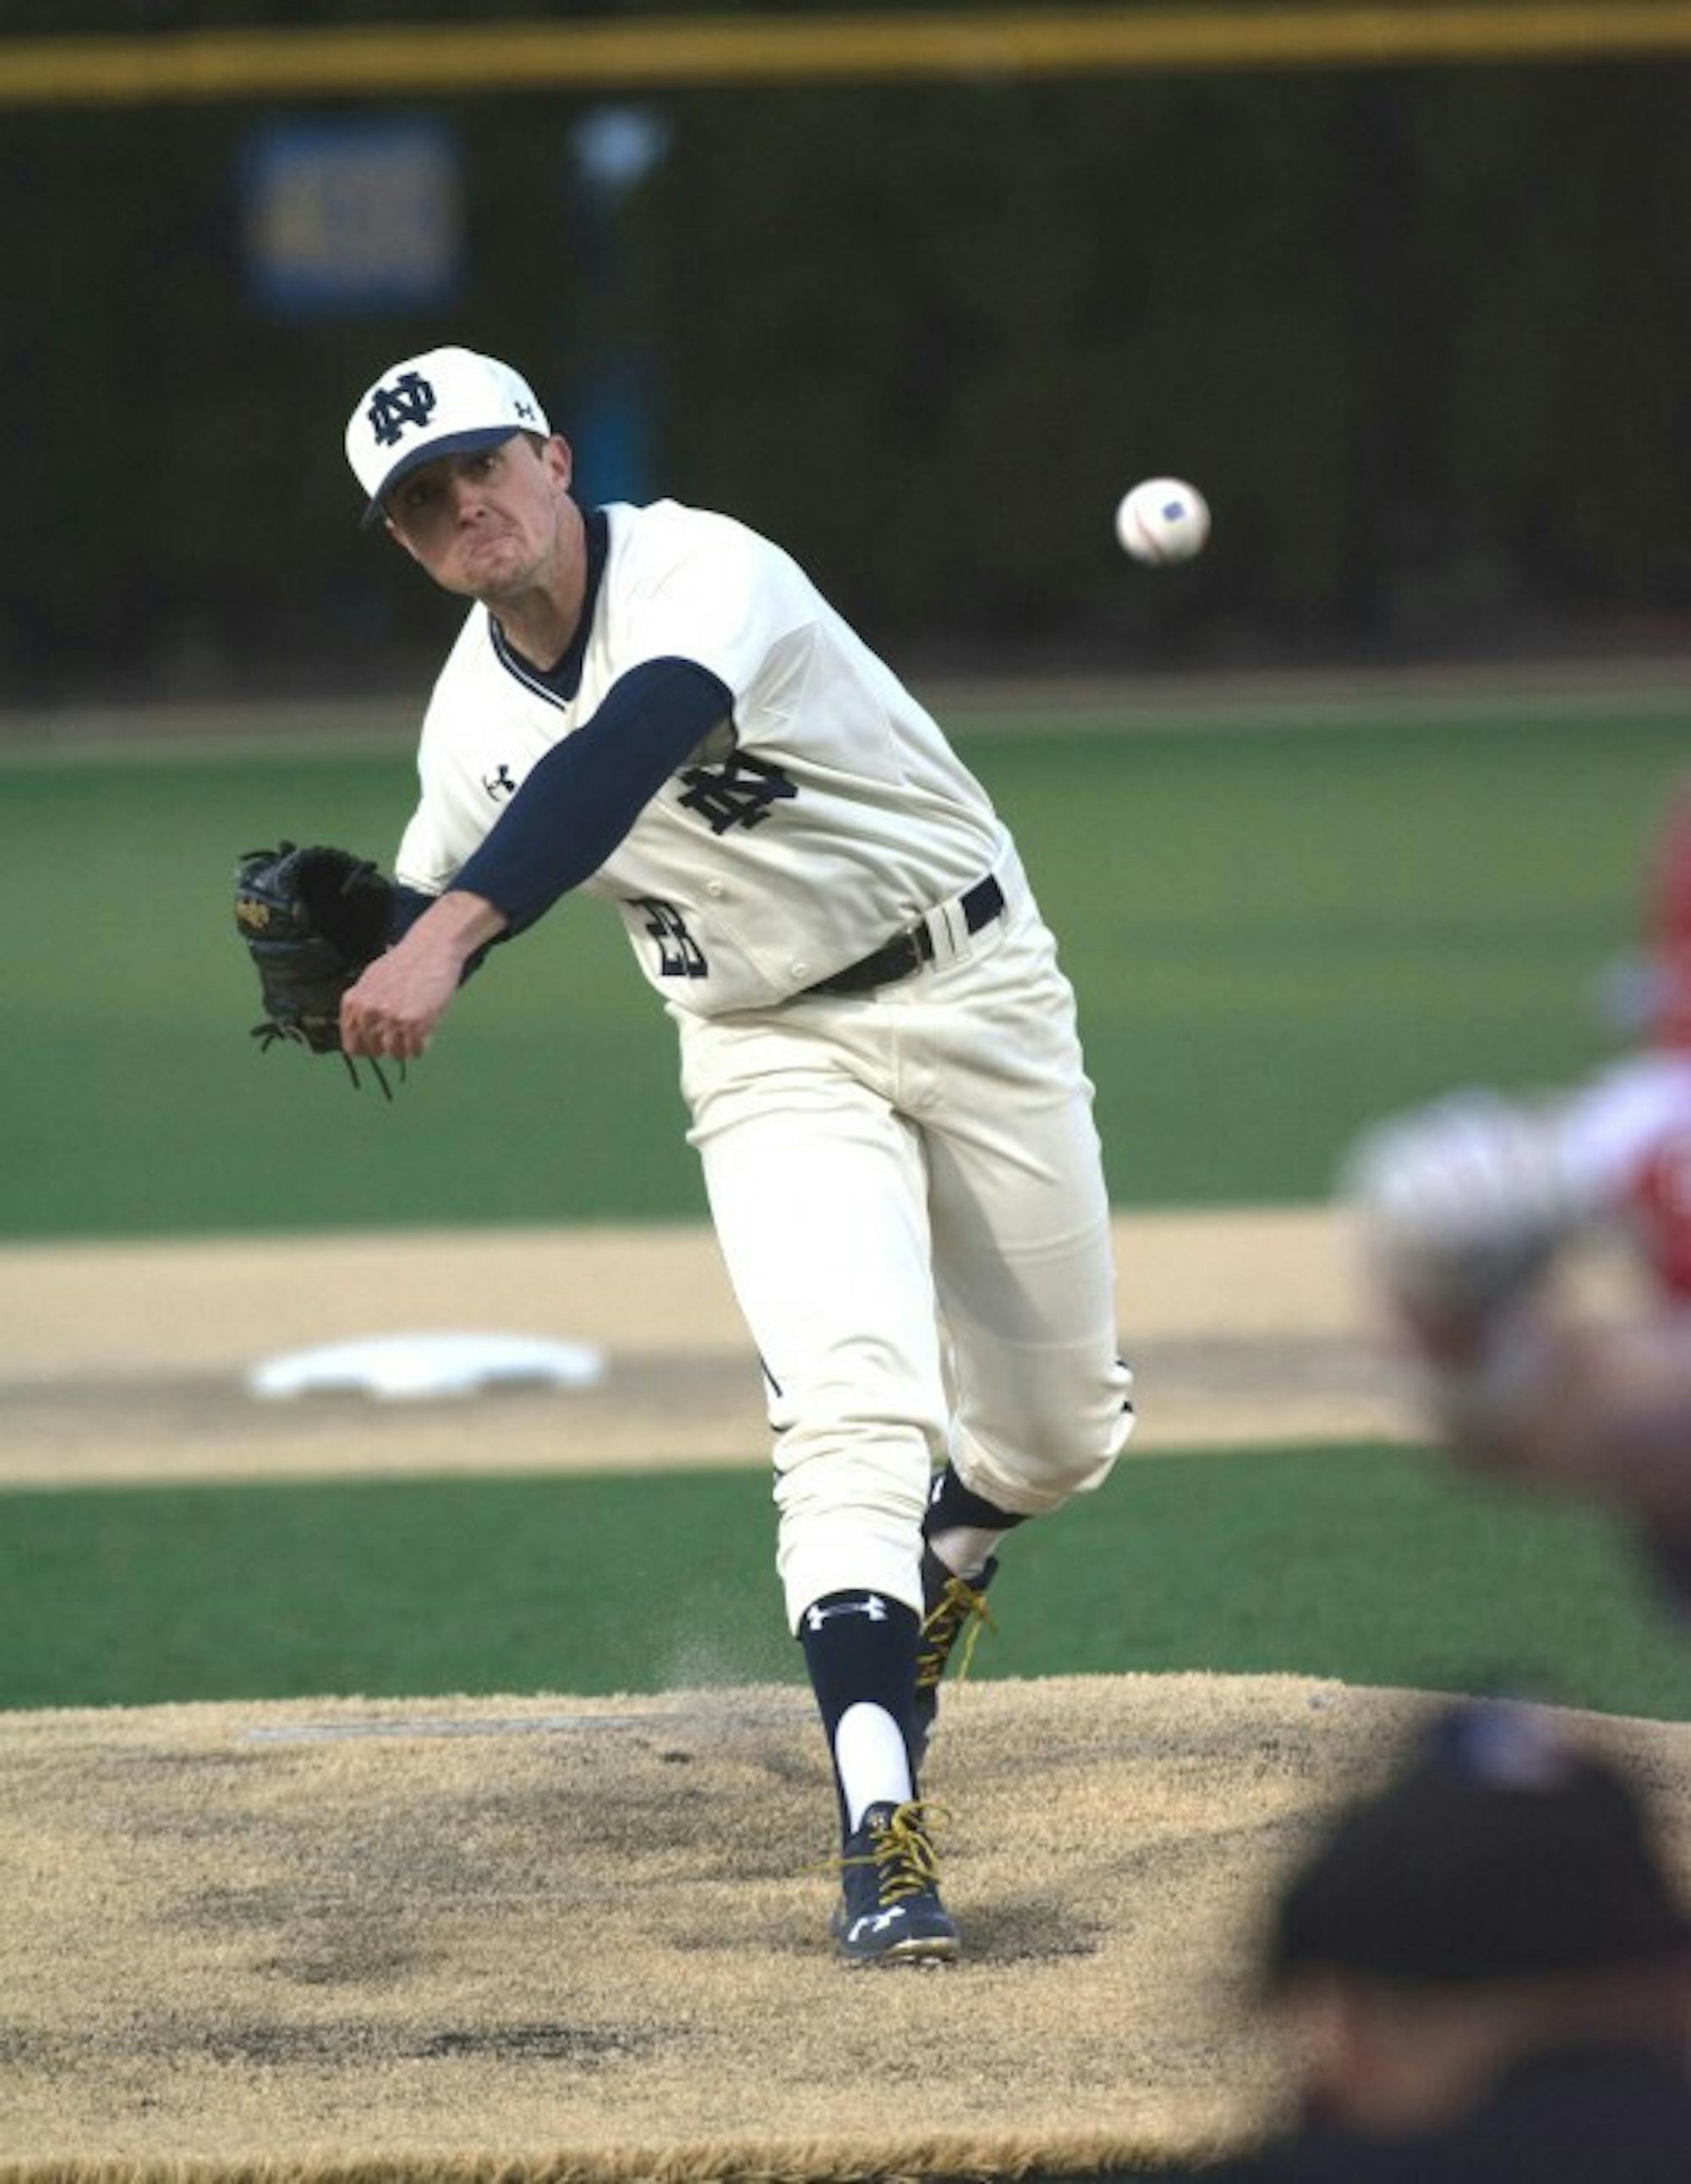 Irish senior left-hander Michael Hearne releases a pitch during Notre Dame's 9-5 win over Illinois Chicago on March 22 at Frank Eck Stadium.